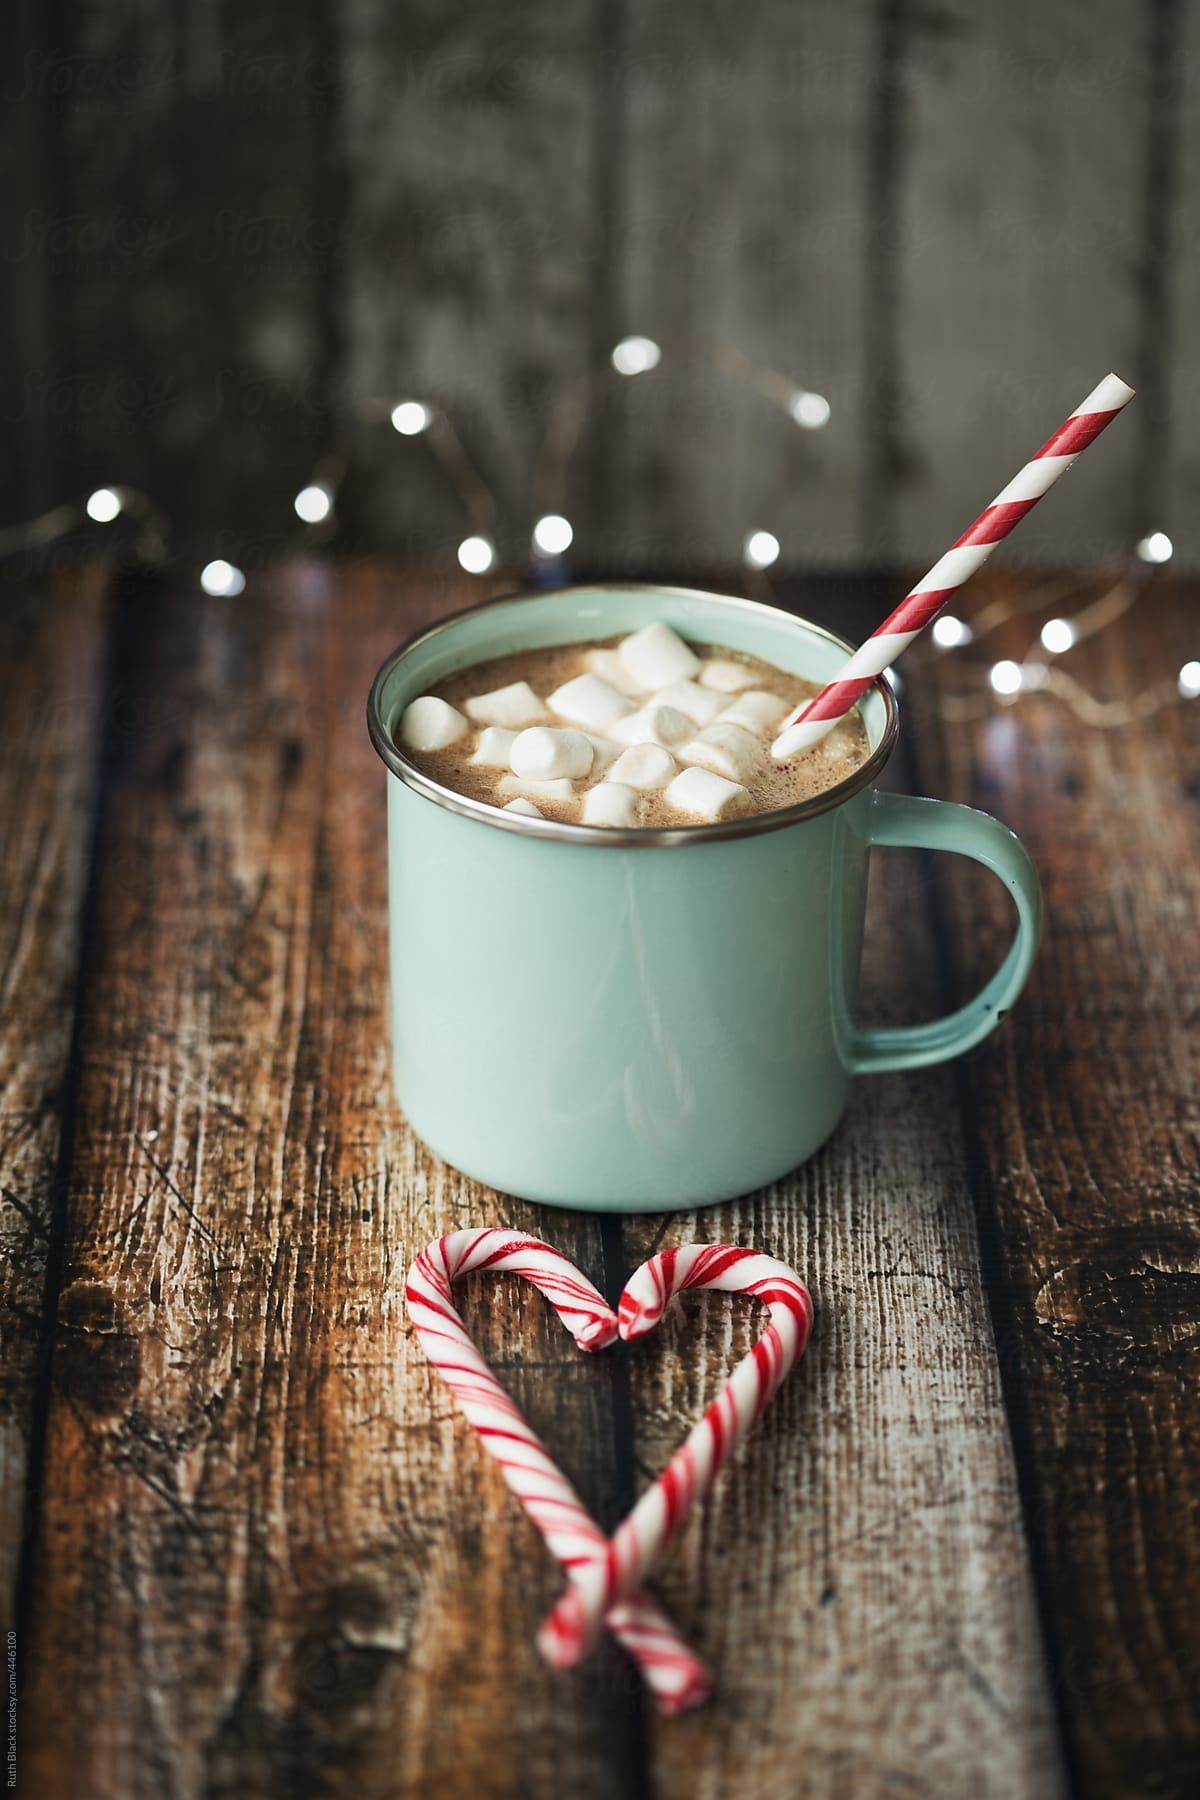 Hot Chocolate In An Enamel Mug Download This High Resolution By Ruth. Wallpaper Iphone Christmas, Christmas Wallpaper Background, Christmas Wallpaper